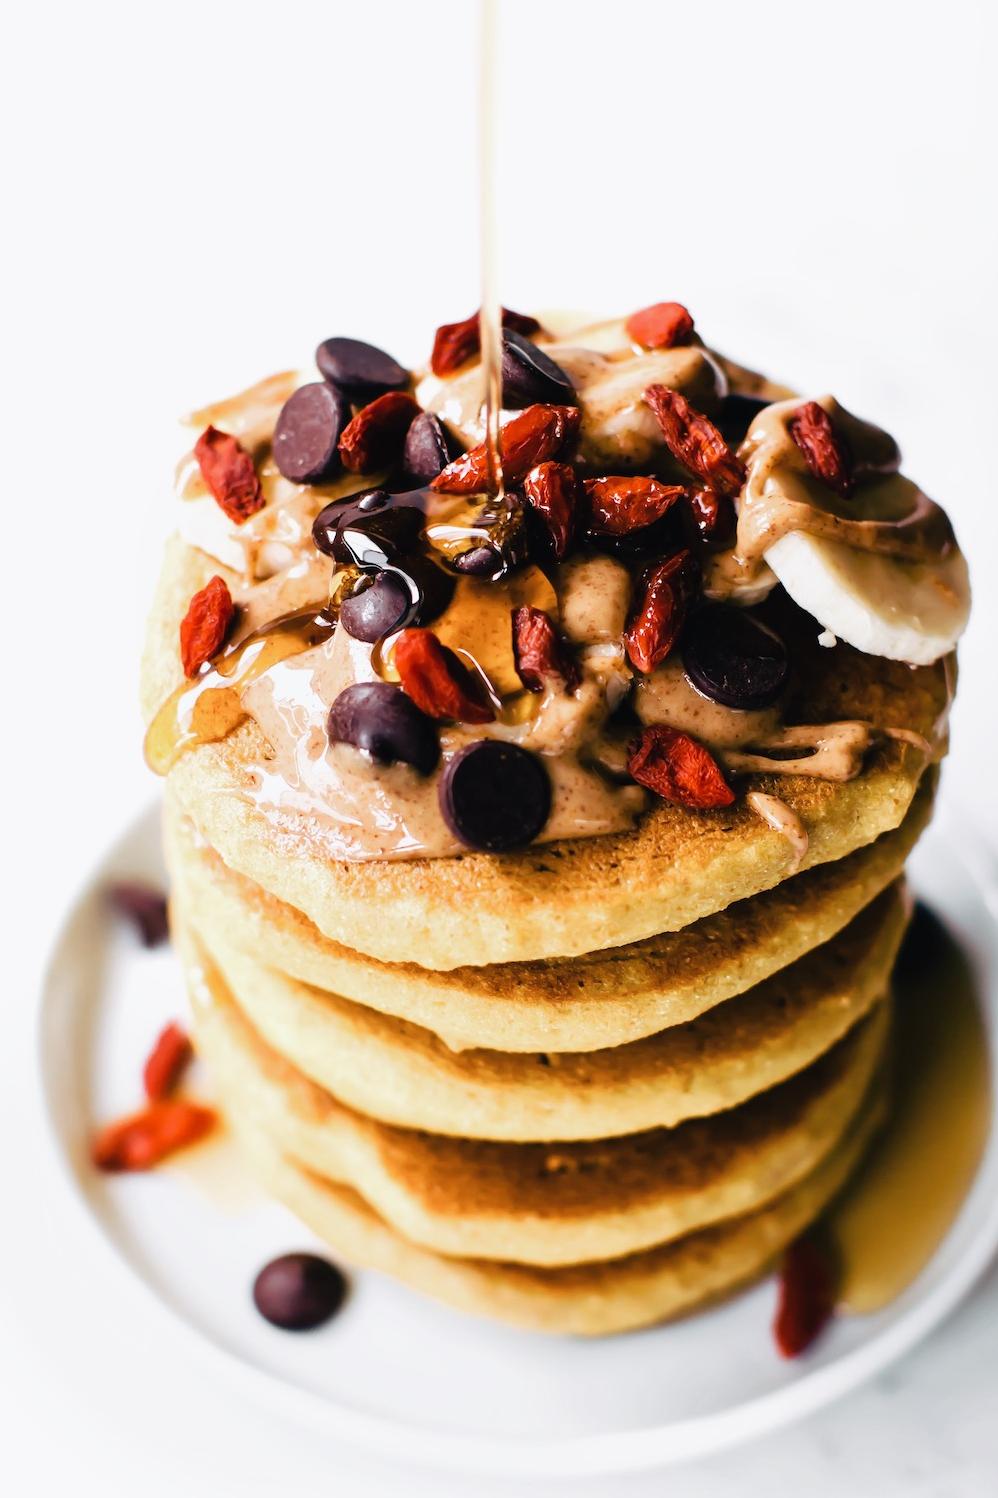  The perfect breakfast for a lazy weekend morning - gluten-free quinoa pancakes topped with your favorite toppings.